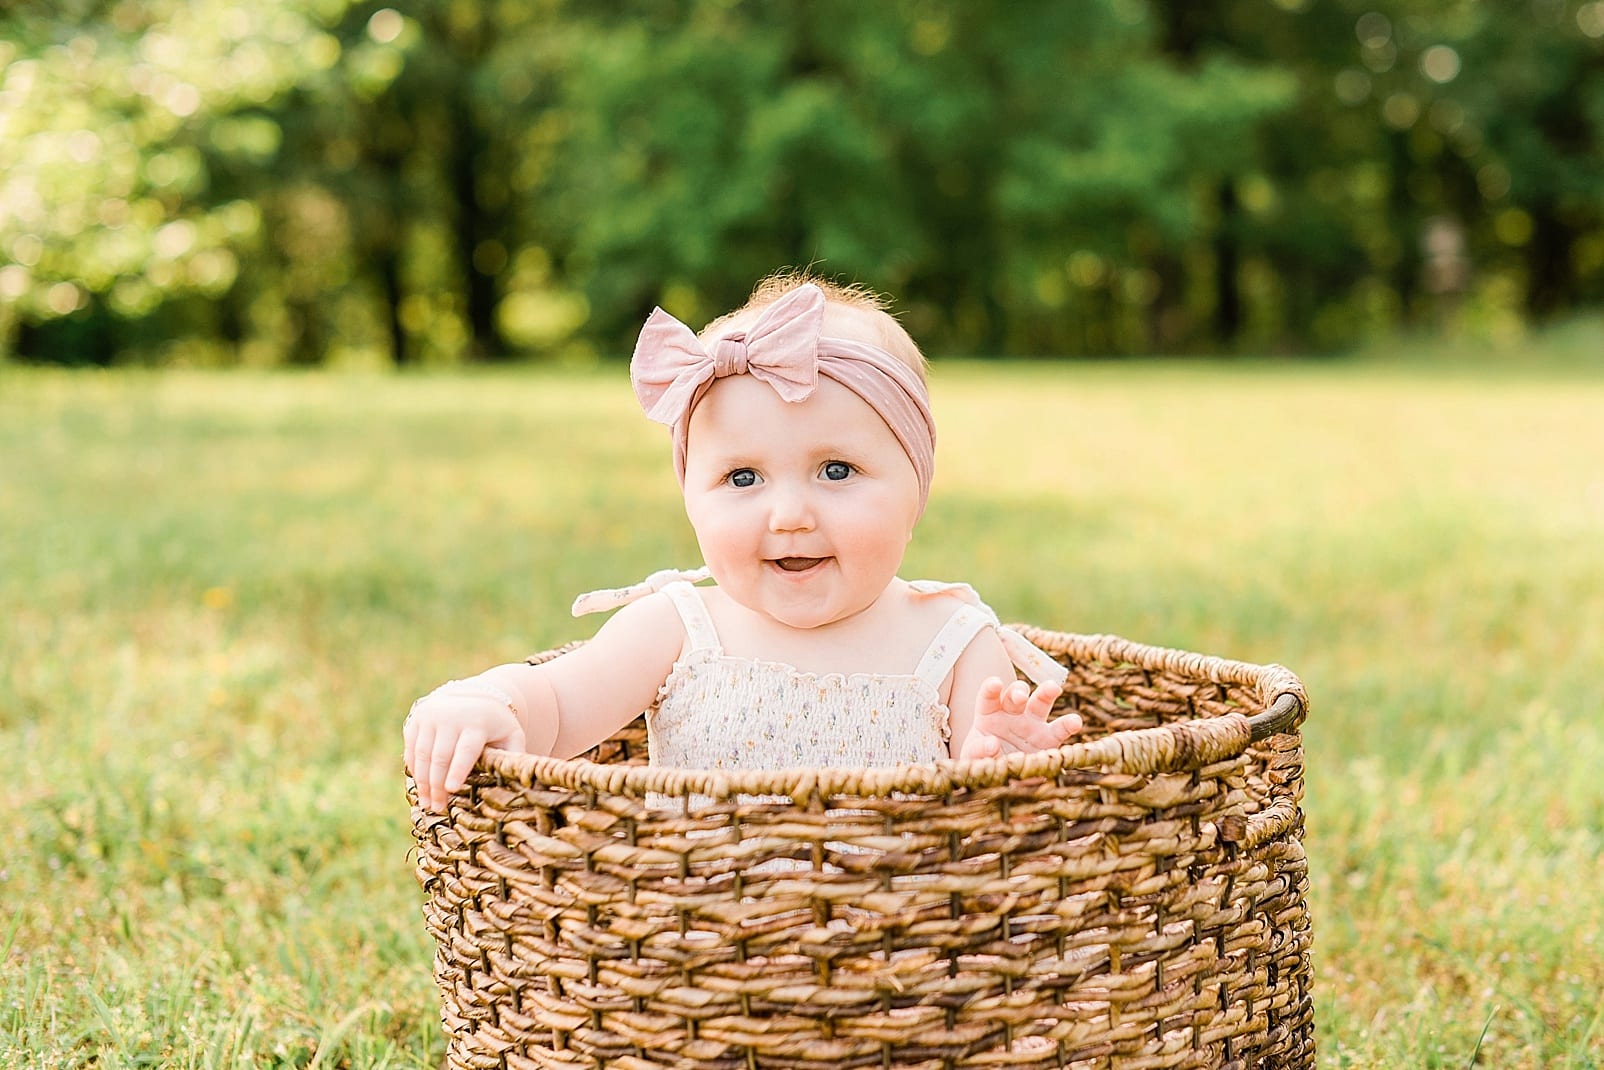 Raleigh nine month old sitting in a big wicker basket photo